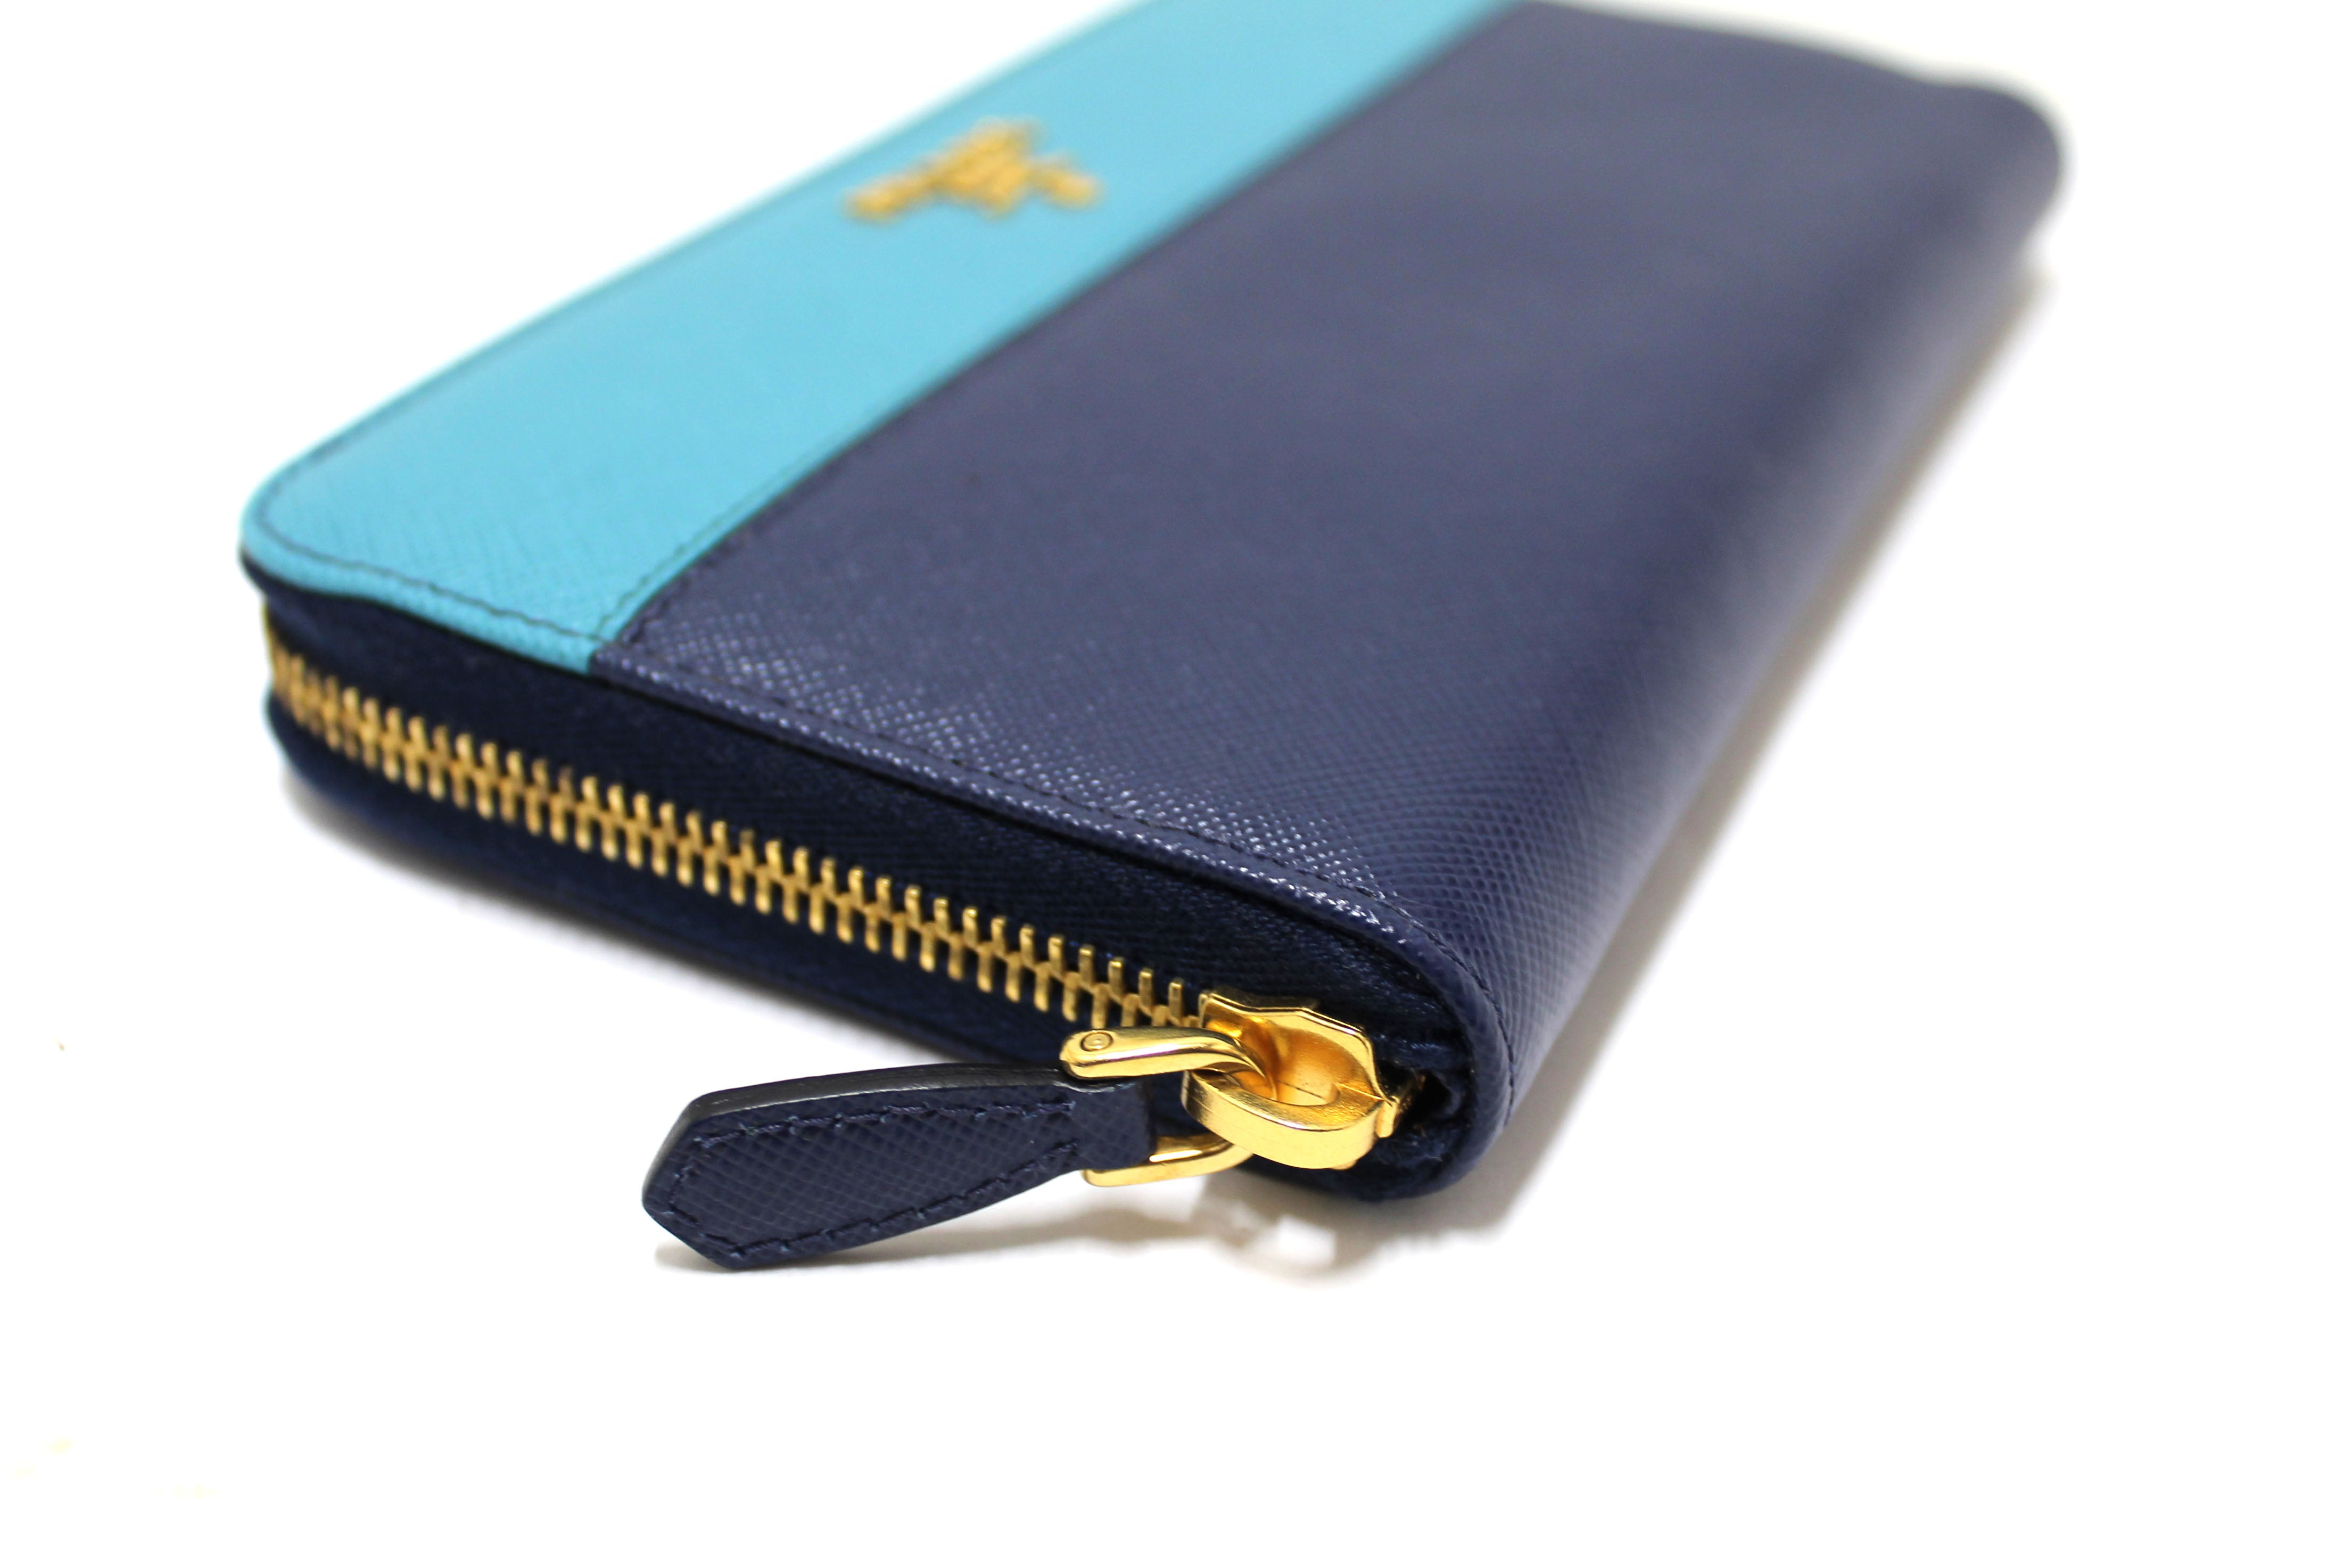 Authentic Prada Navy and Aqua Blue Two-tone Continental Leather Long Wallet